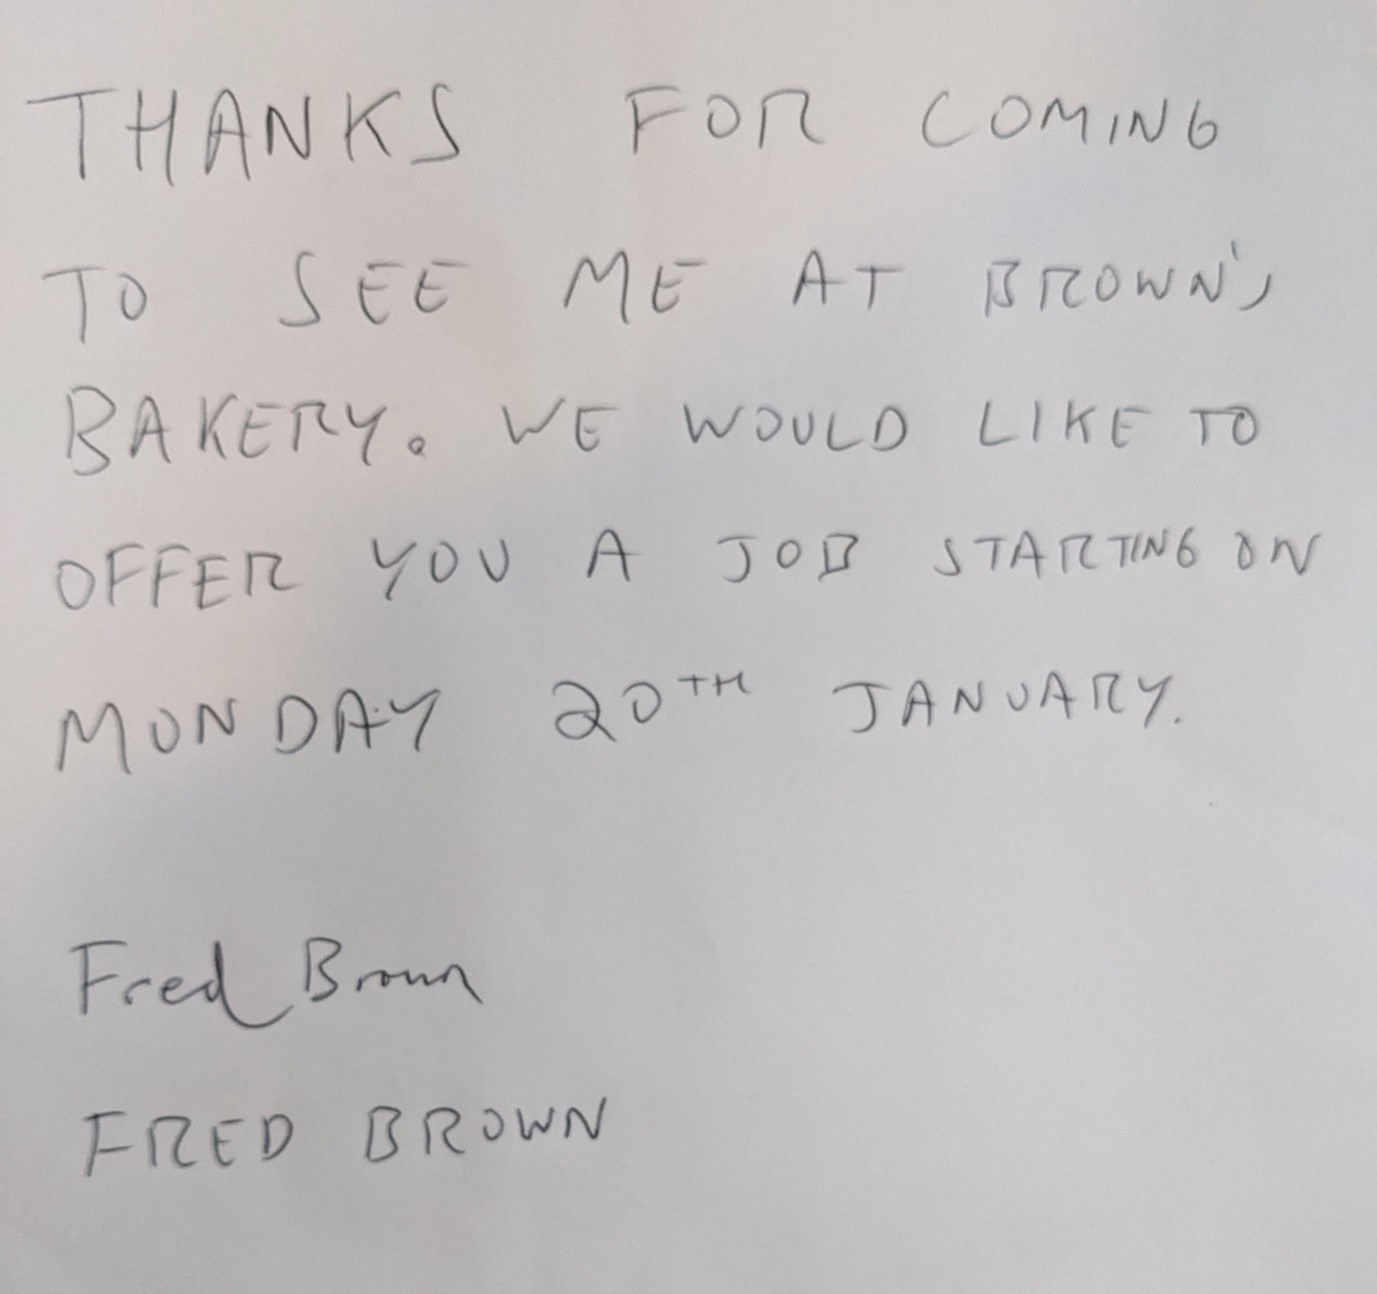 Unacceptable handwritten example which reads: Thanks for coming to see me at Brown's Bakery. We would like to offer you a job starting on Monday 20th January. Fred Brown